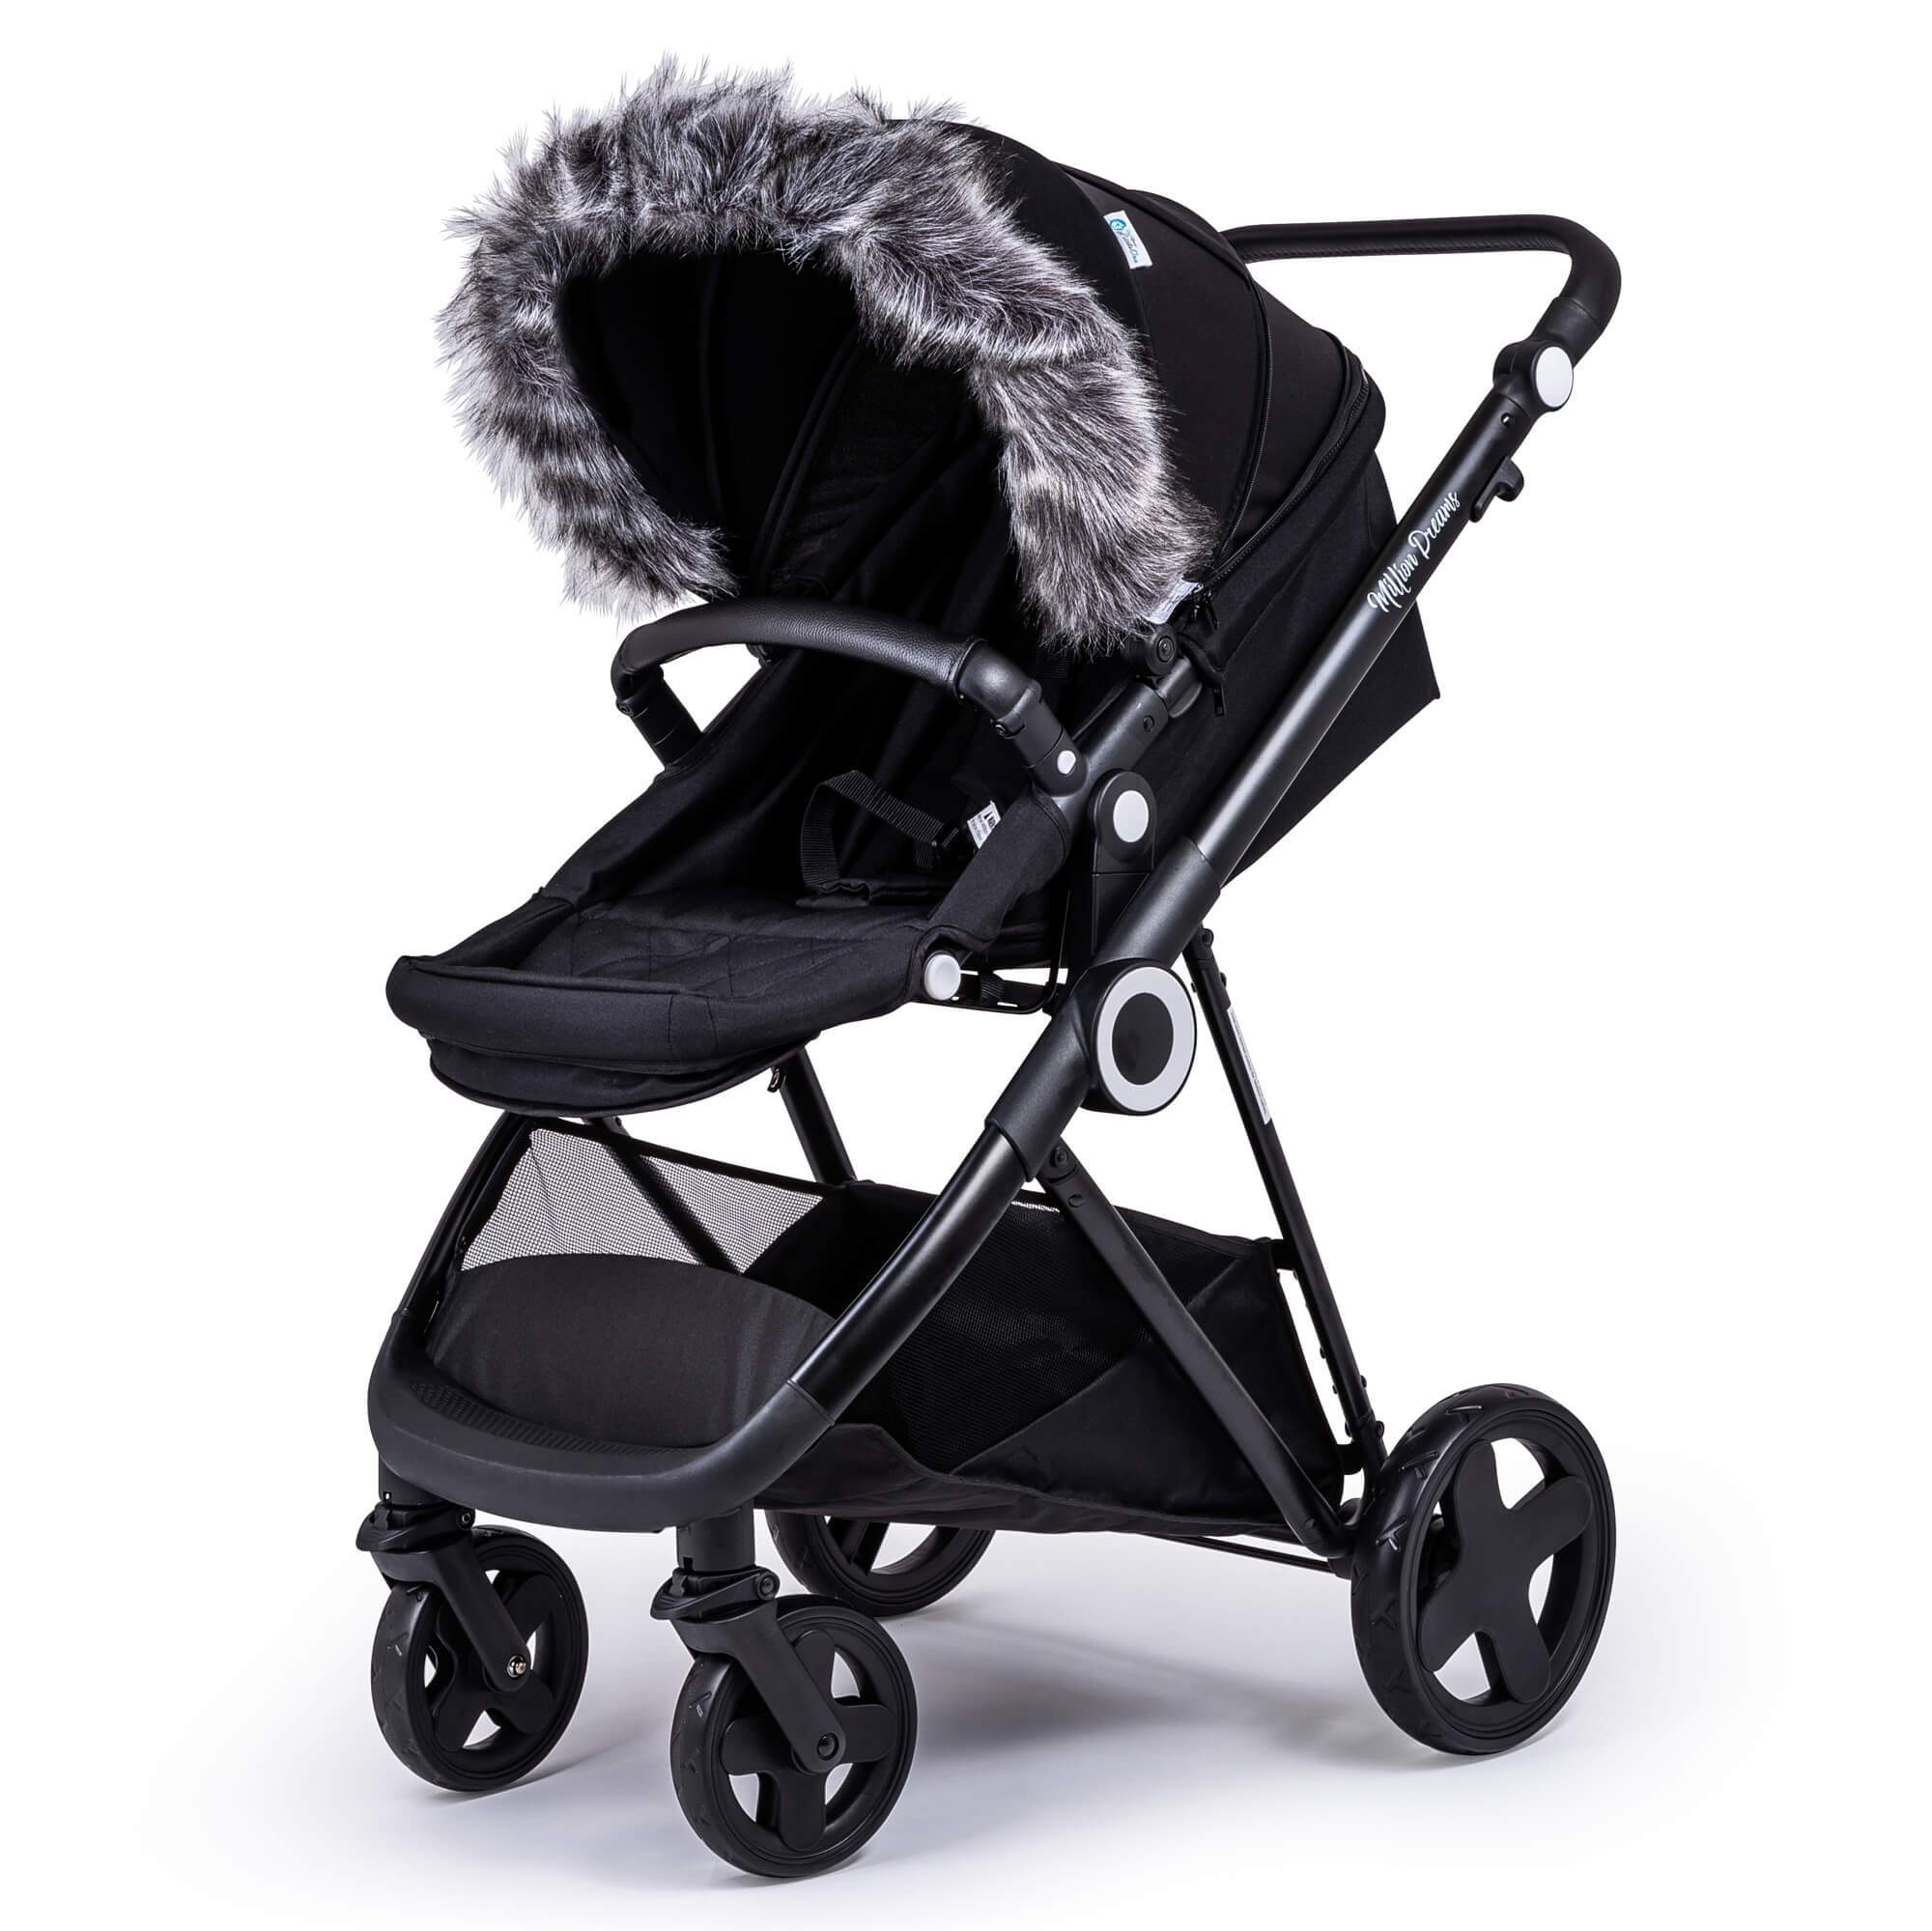 Pram Fur Hood Trim Attachment for Pushchair Compatible with Kiddicare - Dark Grey / Fits All Models | For Your Little One